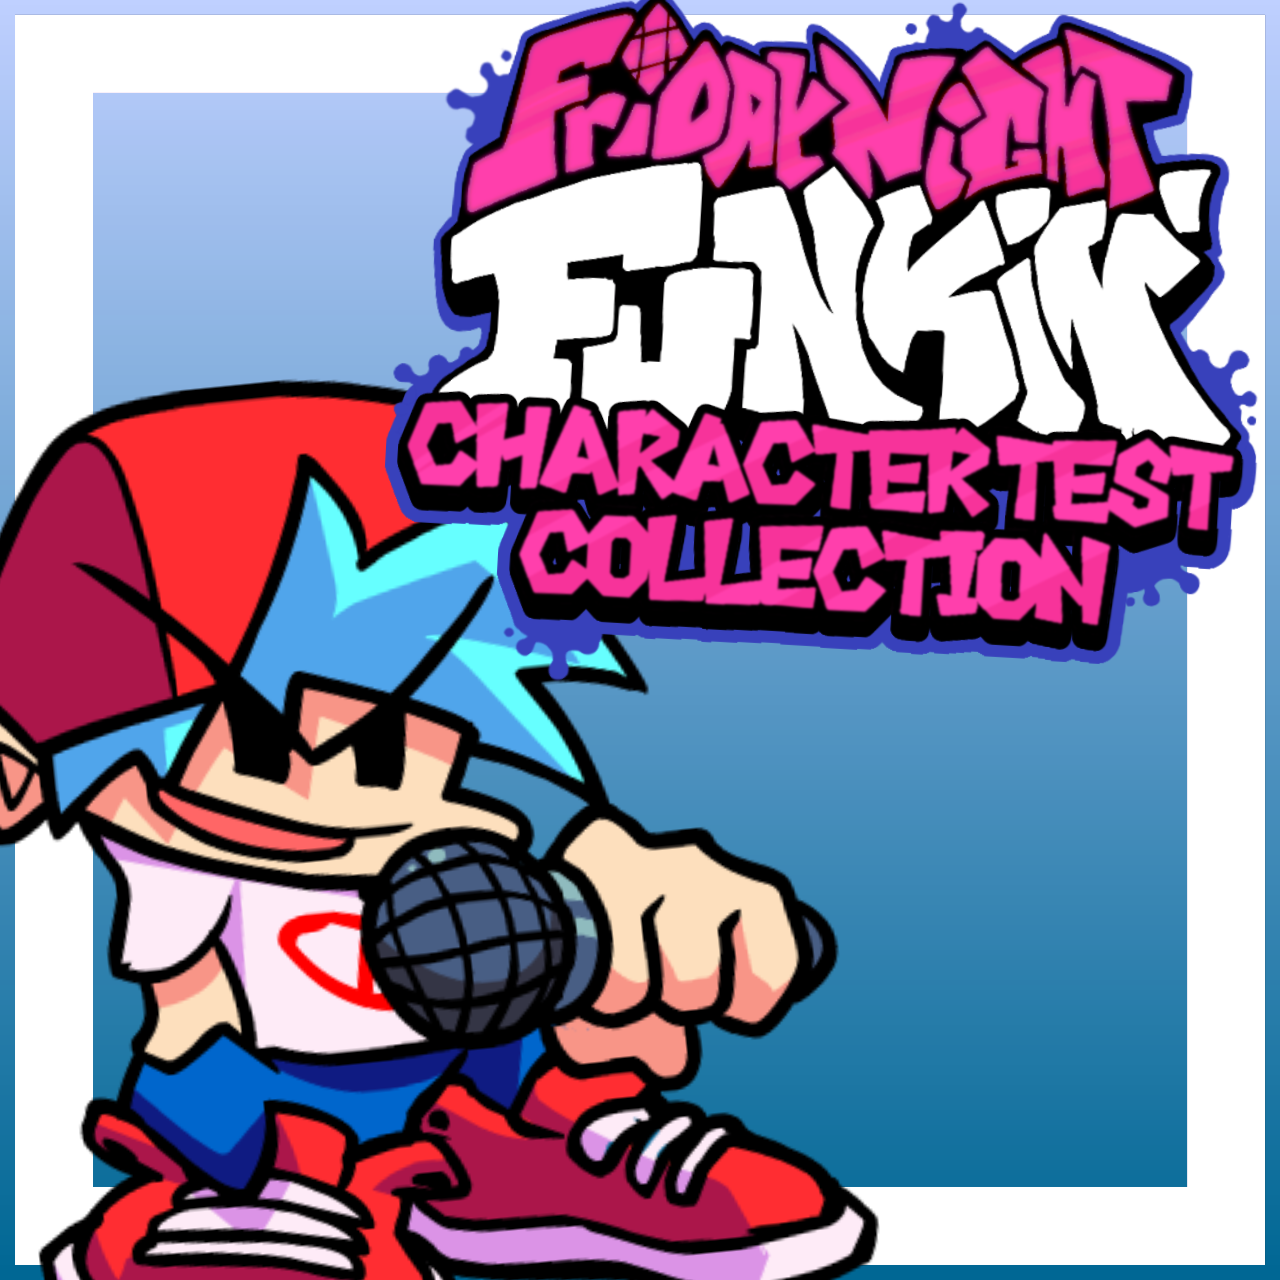 [DISCONTINUED] Friday Night Funkin' - Character Test Collection by skid_